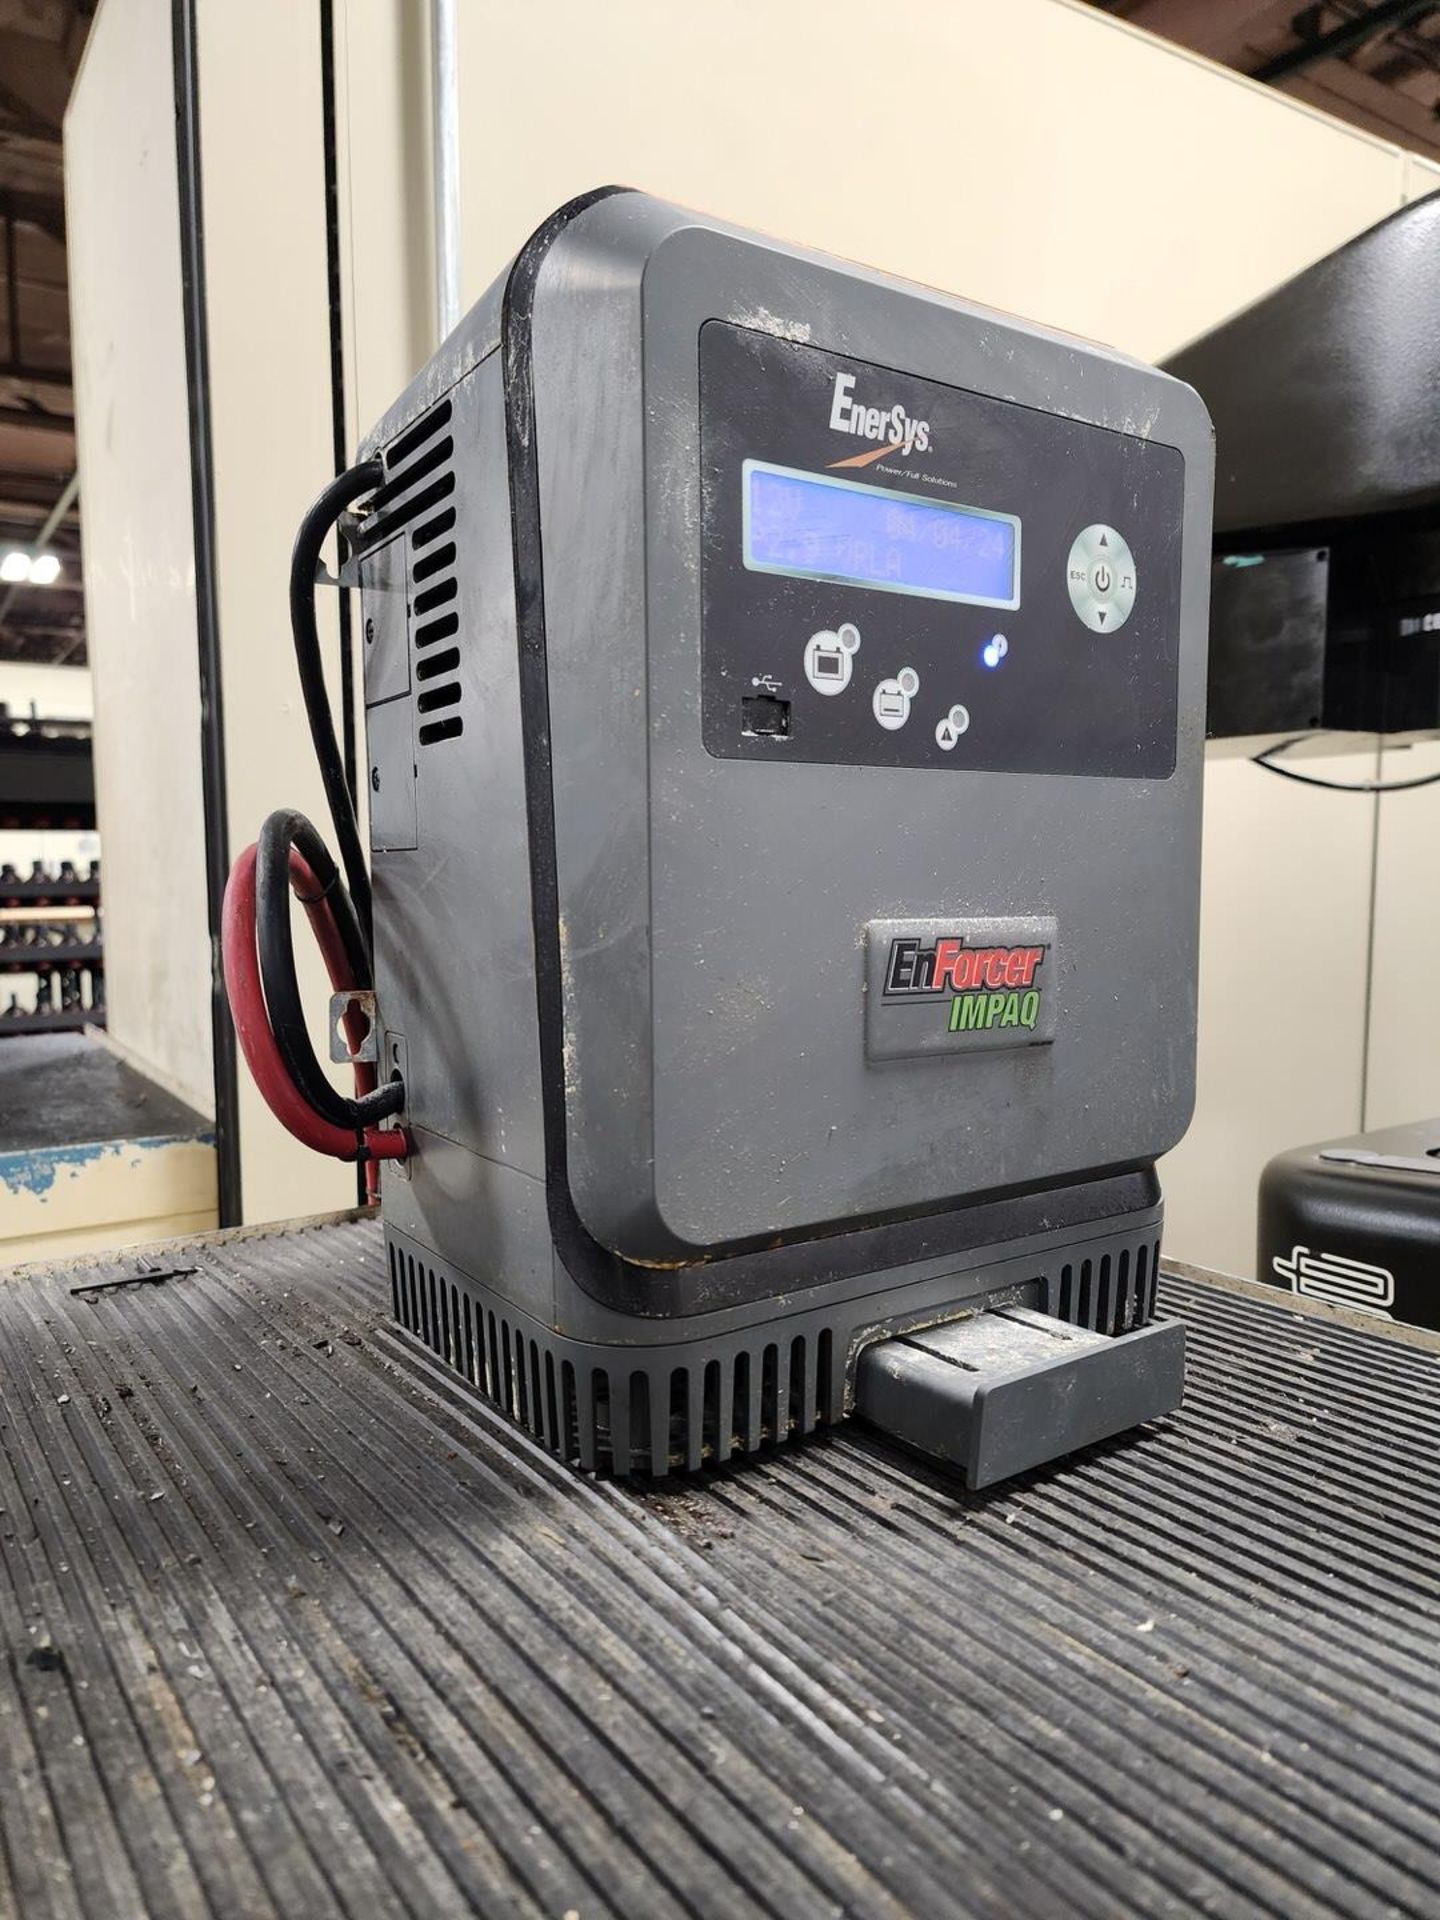 Speroni STP 46 NL Tool Presetter W/ Tool-Chek Controller; W/ EnForcer Impaq Charger; W/ Cabinet & - Image 21 of 28